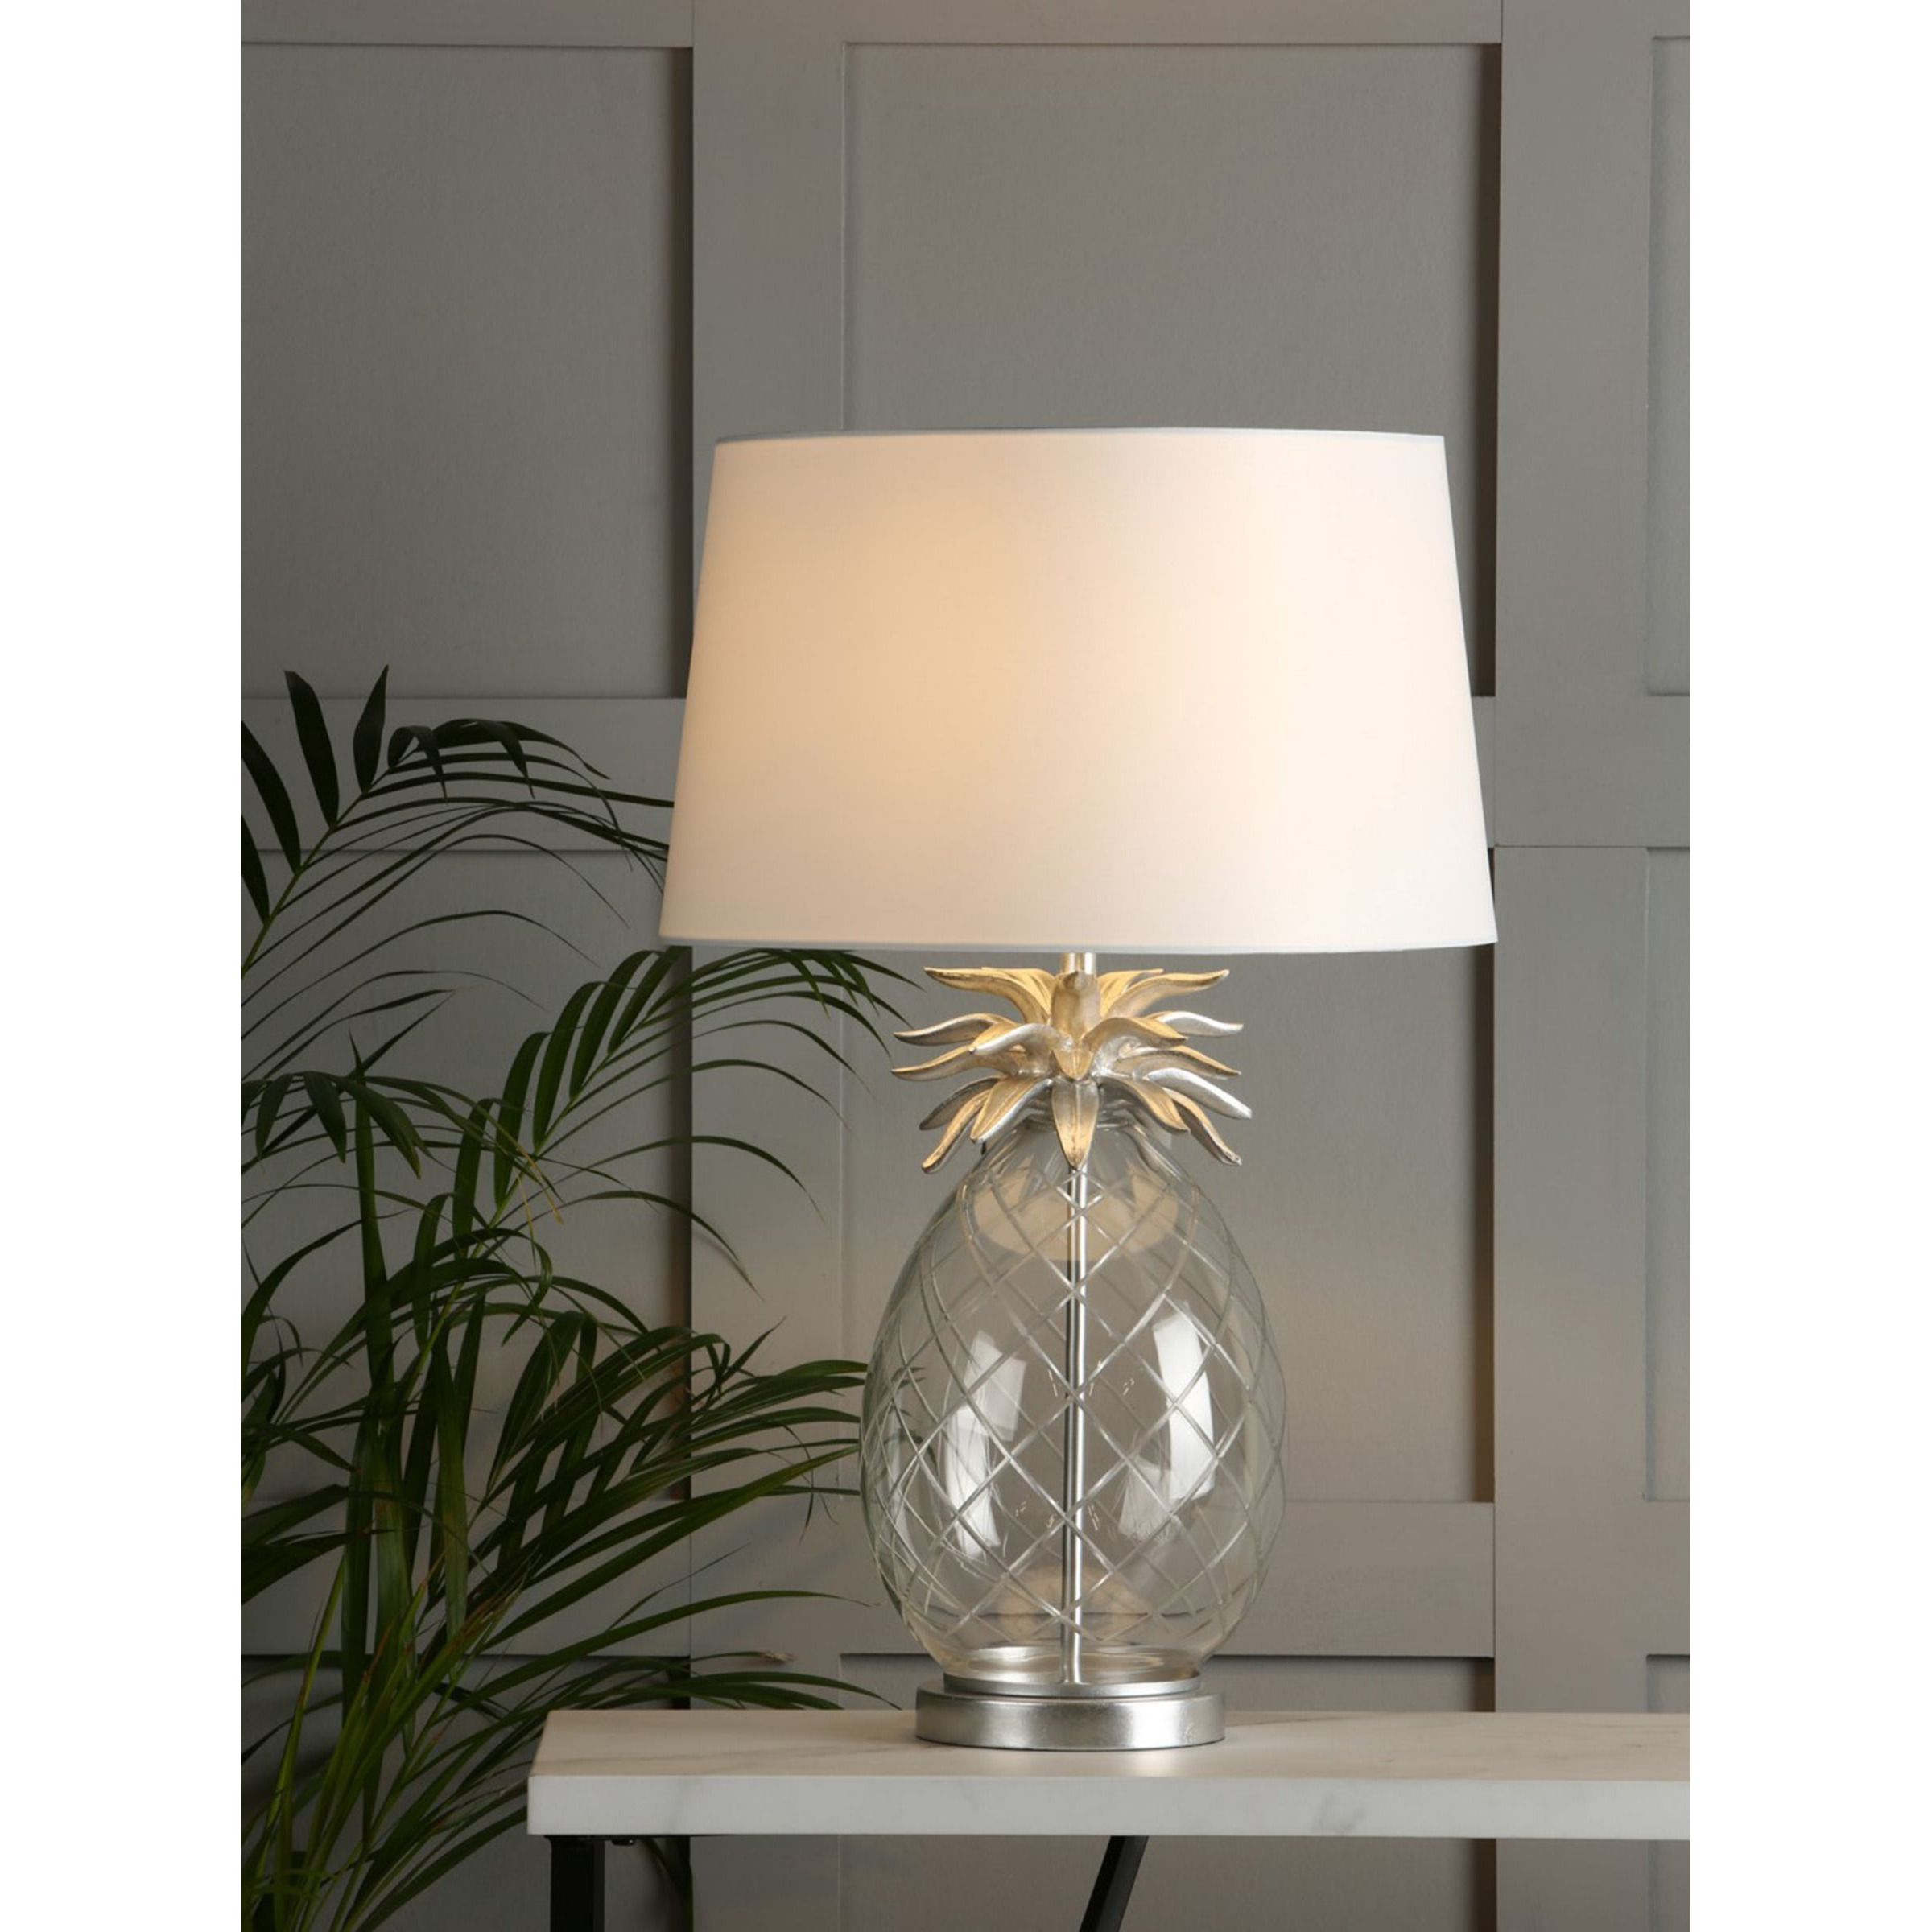 Laura Ashley Pineapple Glass Large Table Lamp - image 1